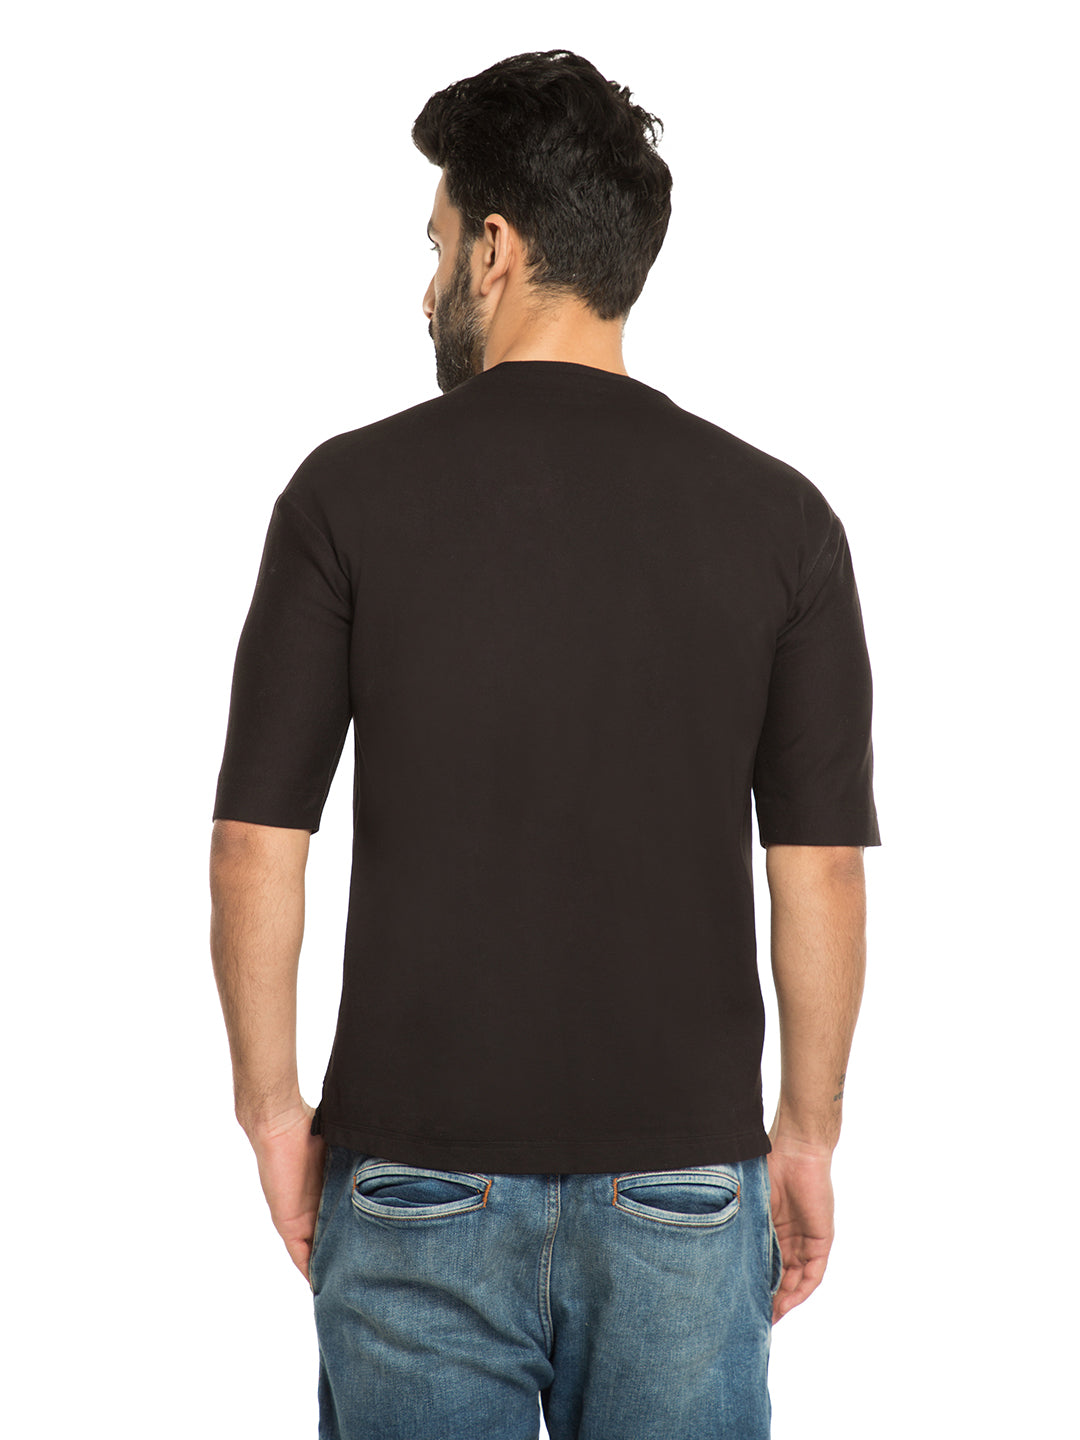 BLACK T-SHIRT WITH ZIP DETAIL